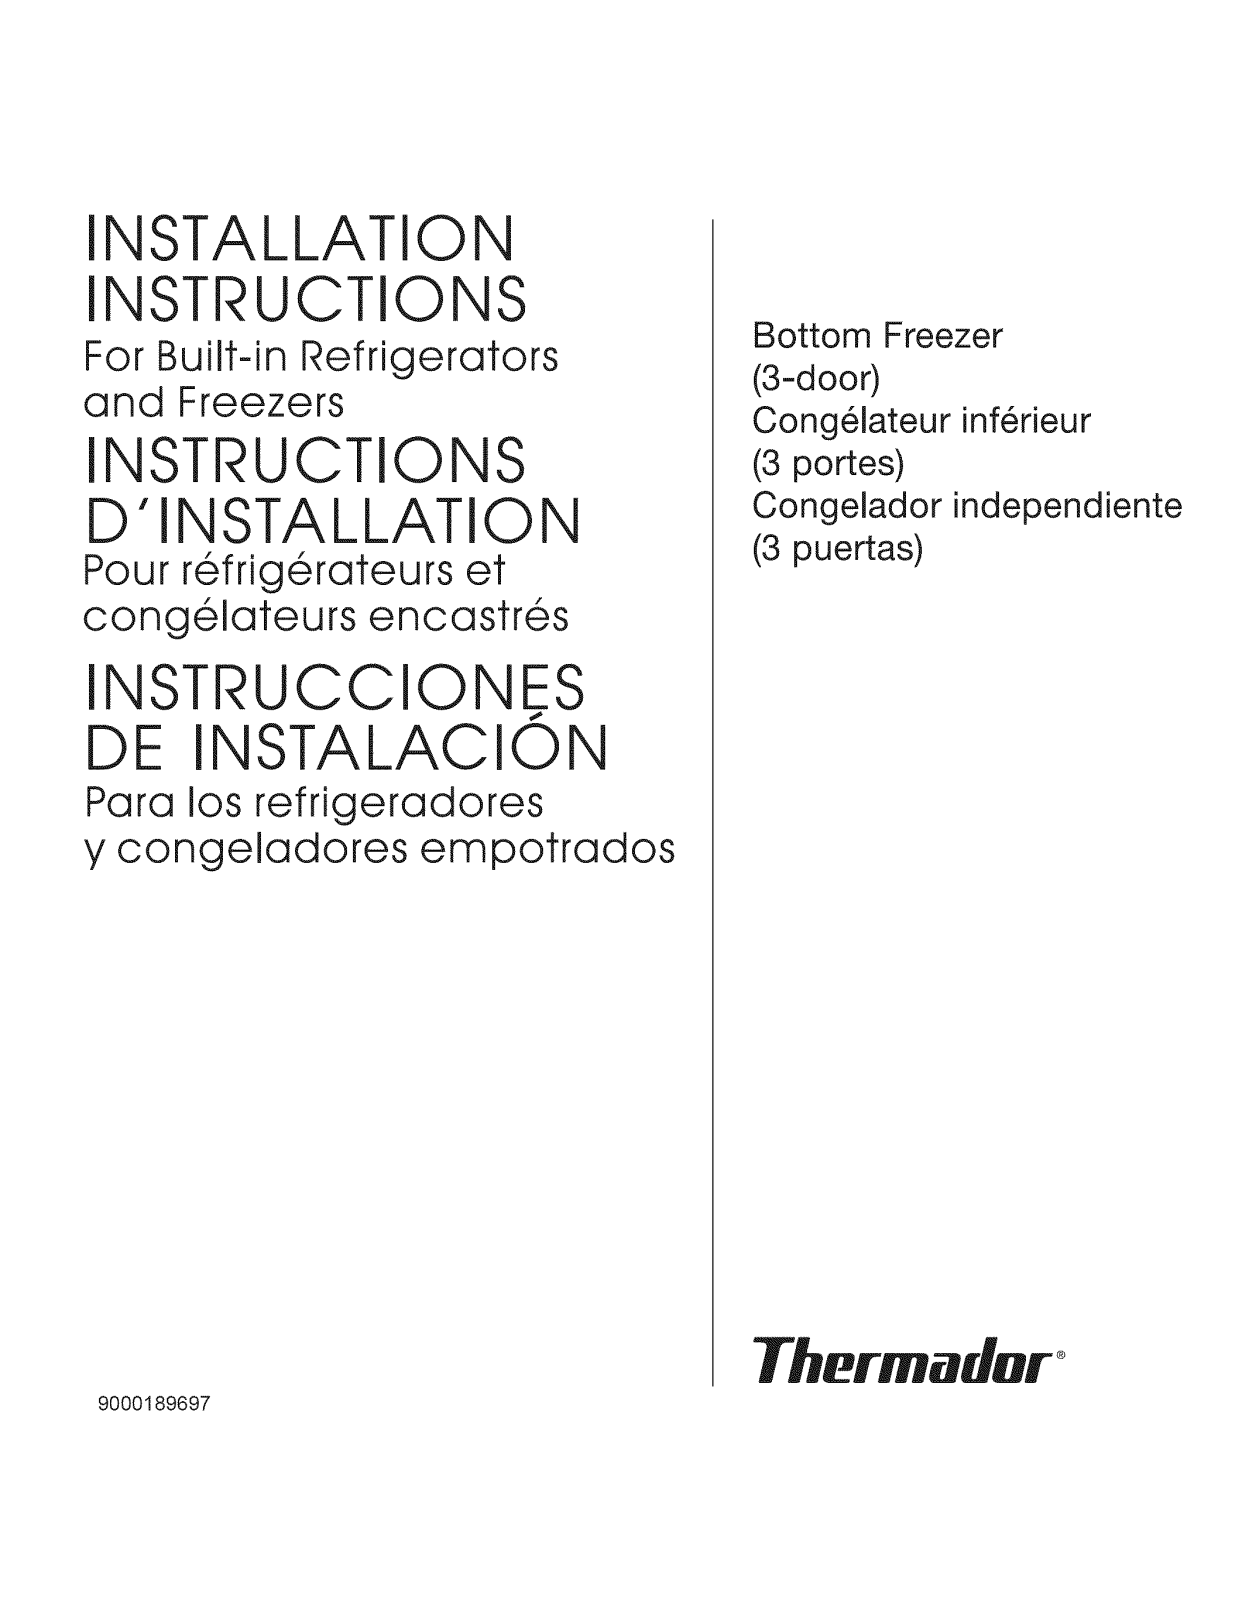 Thermador T36IT71NNP/31, T36IT71NNP/35, T36IT71NNP/99, T36IT71NNP/29, T36IT71NNP/12 Installation Guide